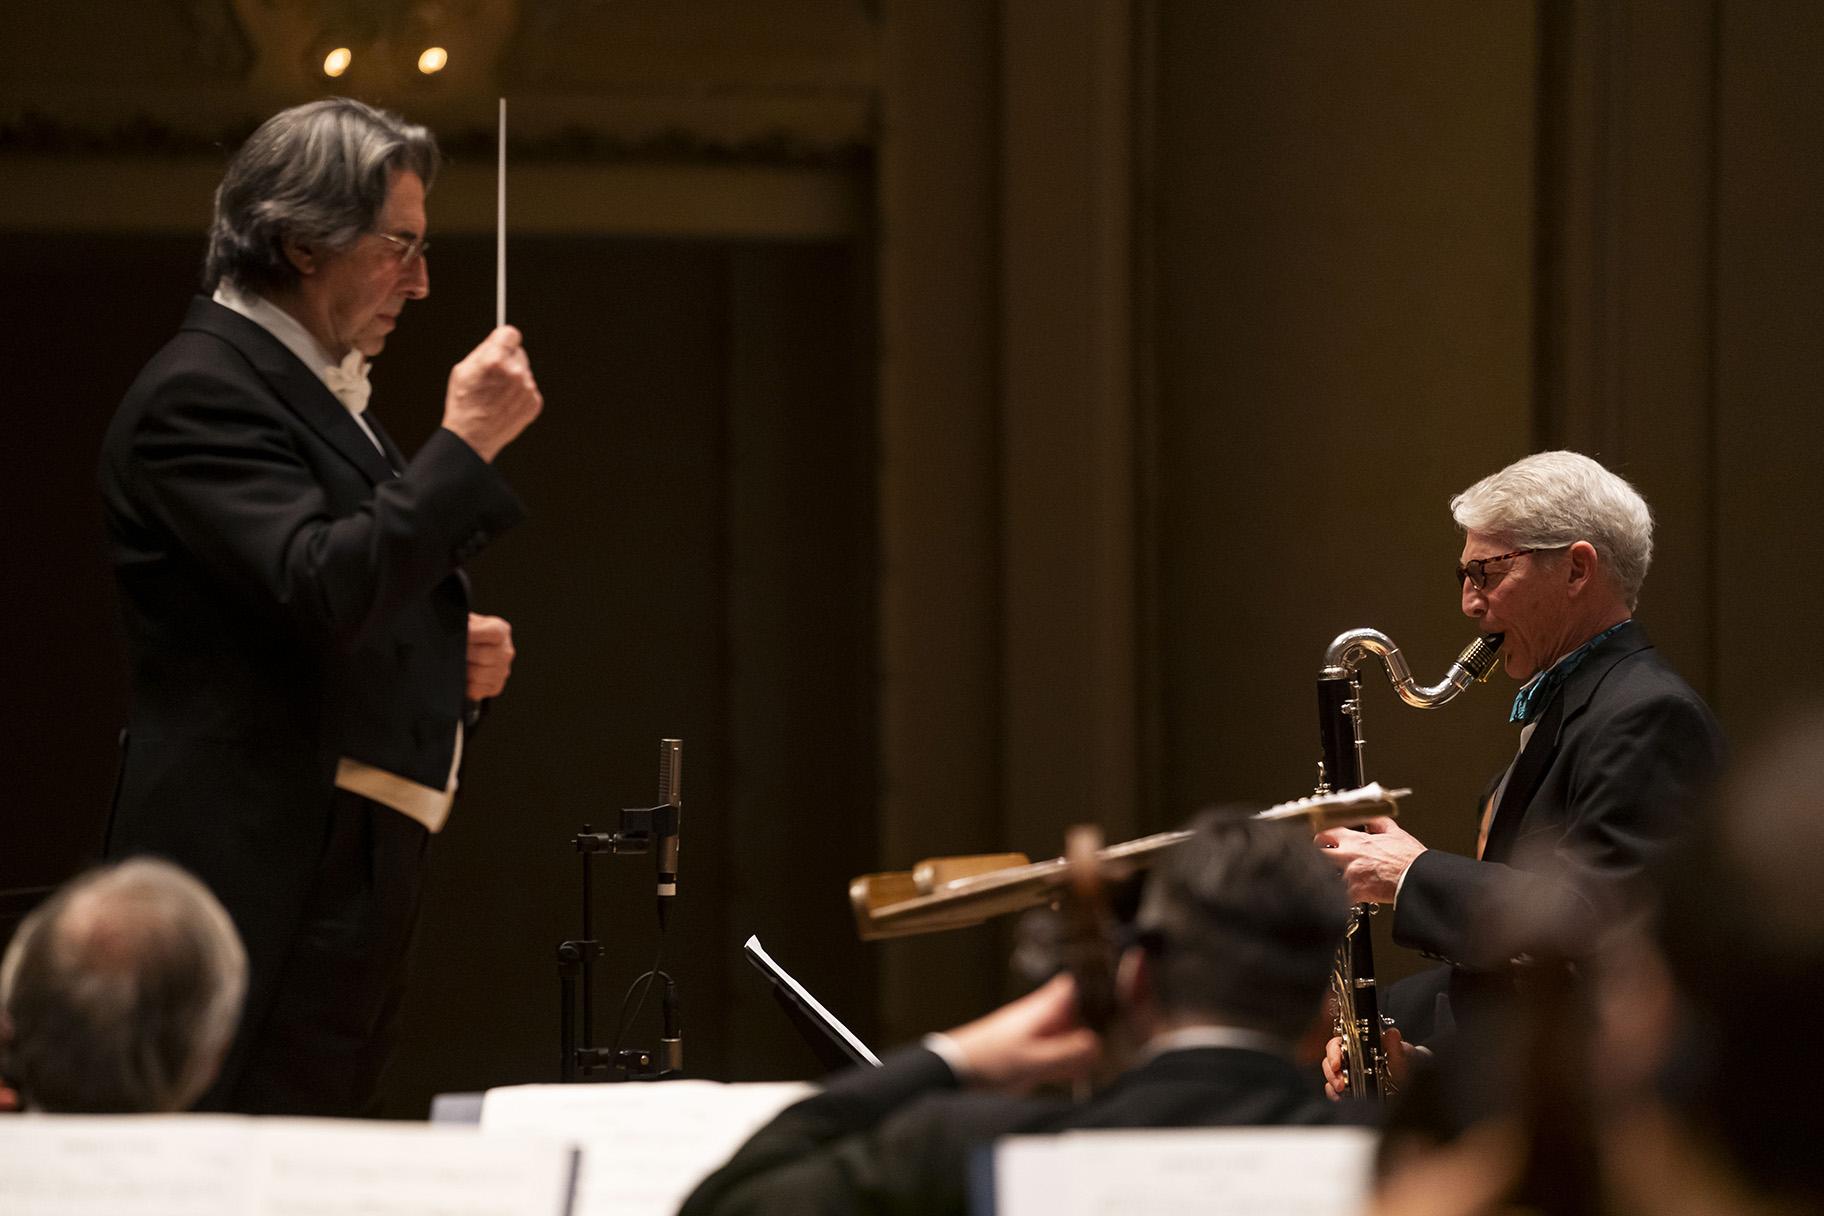 Zell Music Director Riccardo Muti conducts the world premiere of Nicolas Bacri’s “Ophelia’s Tears” with the Chicago Symphony Orchestra and CSO Bass-Clarinet J. Lawrie Bloom on Feb. 20, 2020. (Credit: Todd Rosenberg)